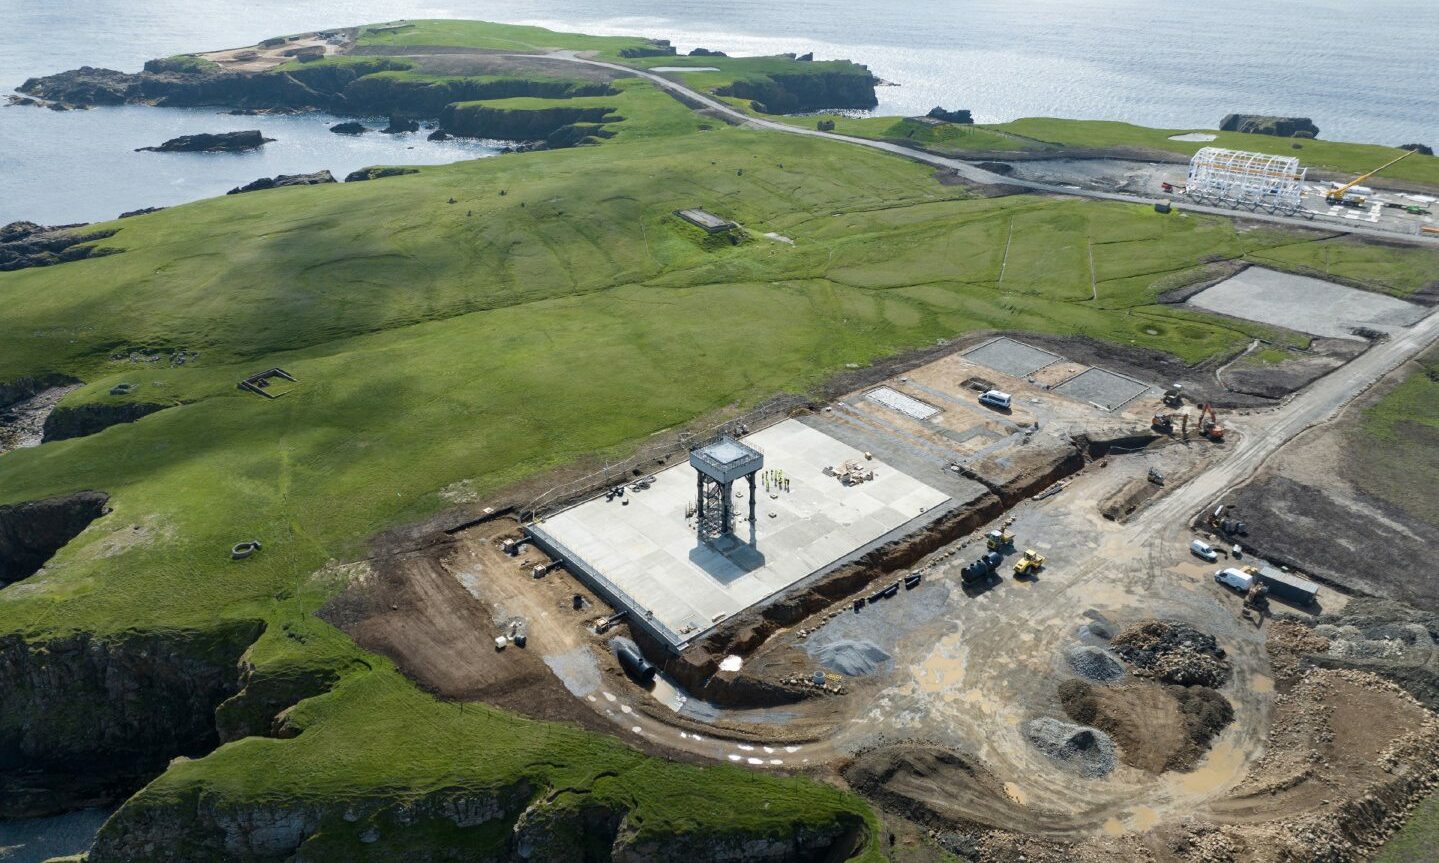 Aerial view of Shetland spaceport with view to sea behind.